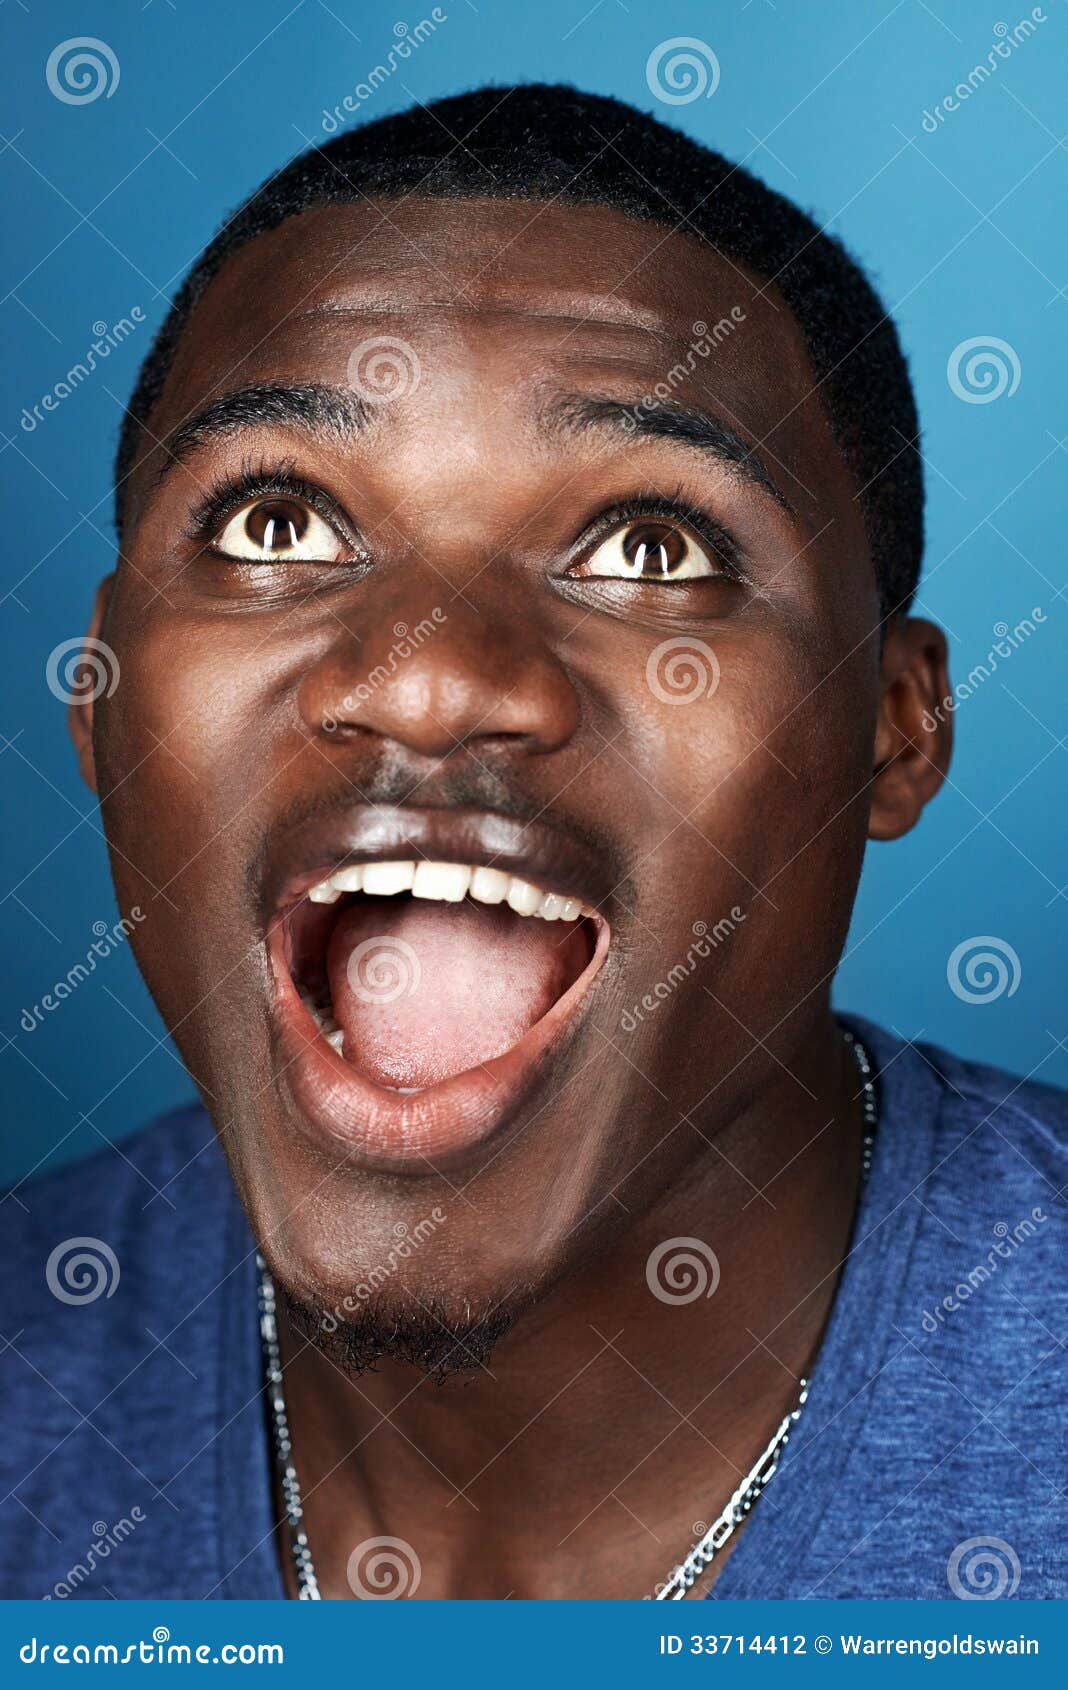 Funny face african man stock photo. Image of funny, hairstyle - 33714412